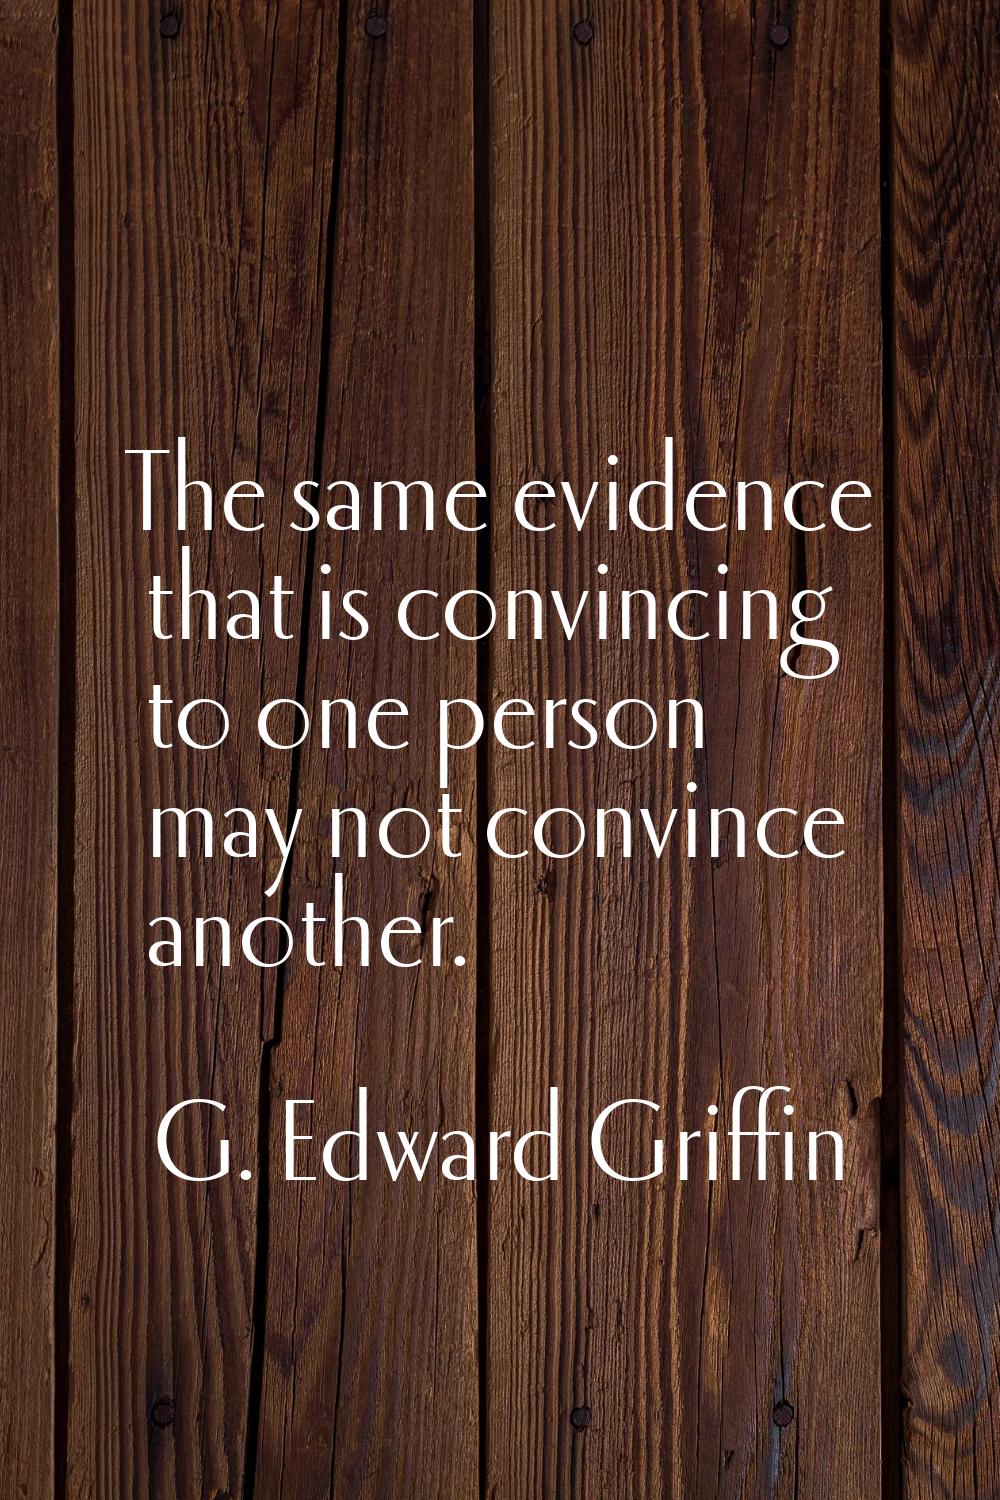 The same evidence that is convincing to one person may not convince another.